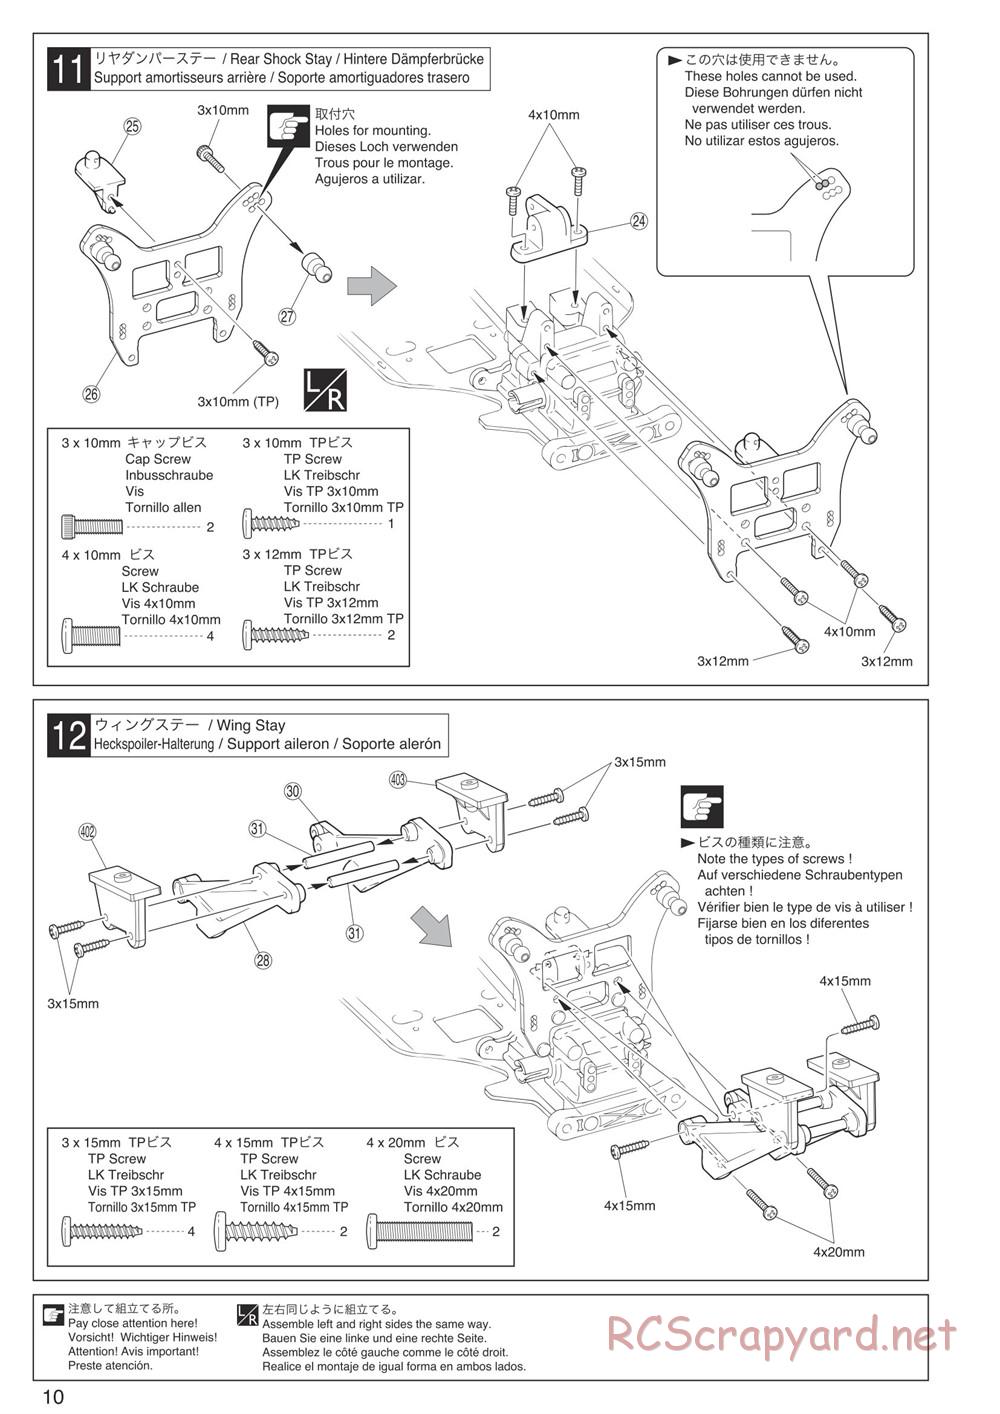 Kyosho - Inferno Neo 3.0 - Manual - Page 10